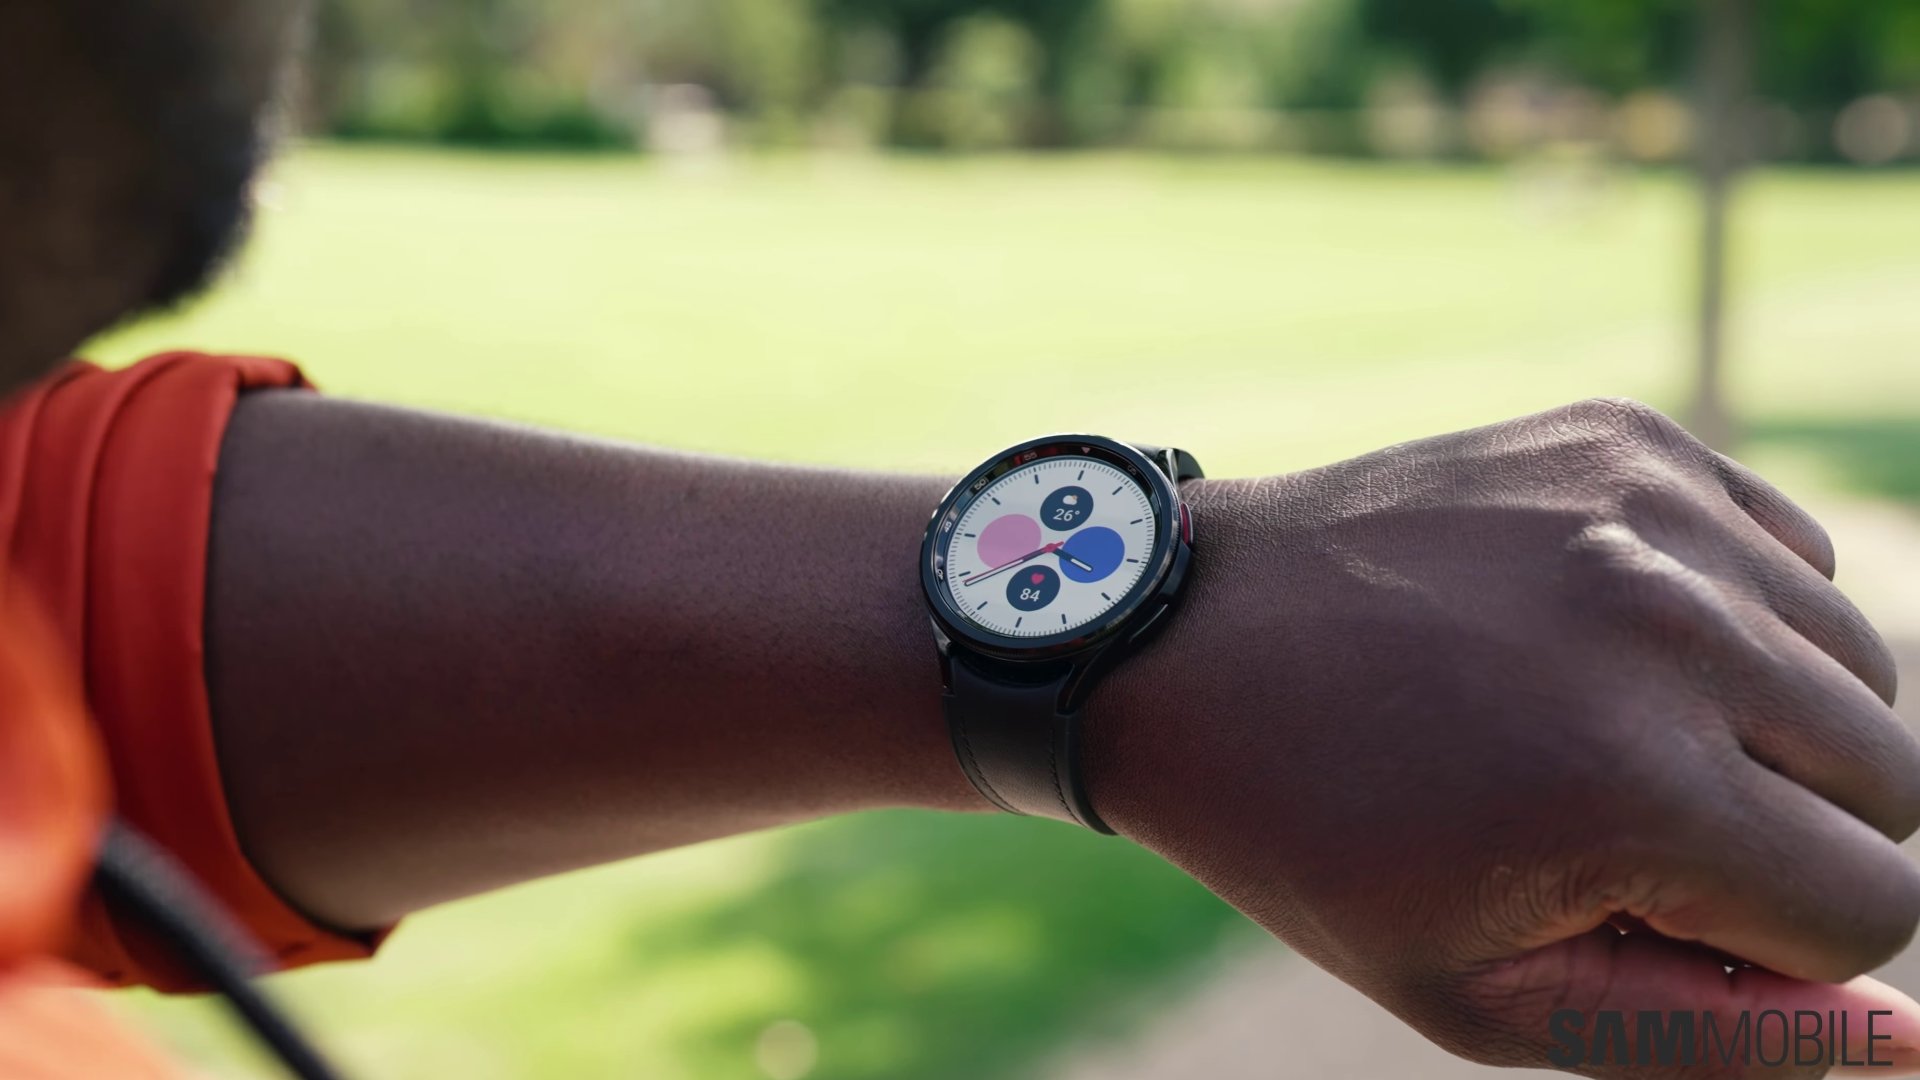 Google Wallet on Galaxy Watch asking for PIN to make payments is just a bug